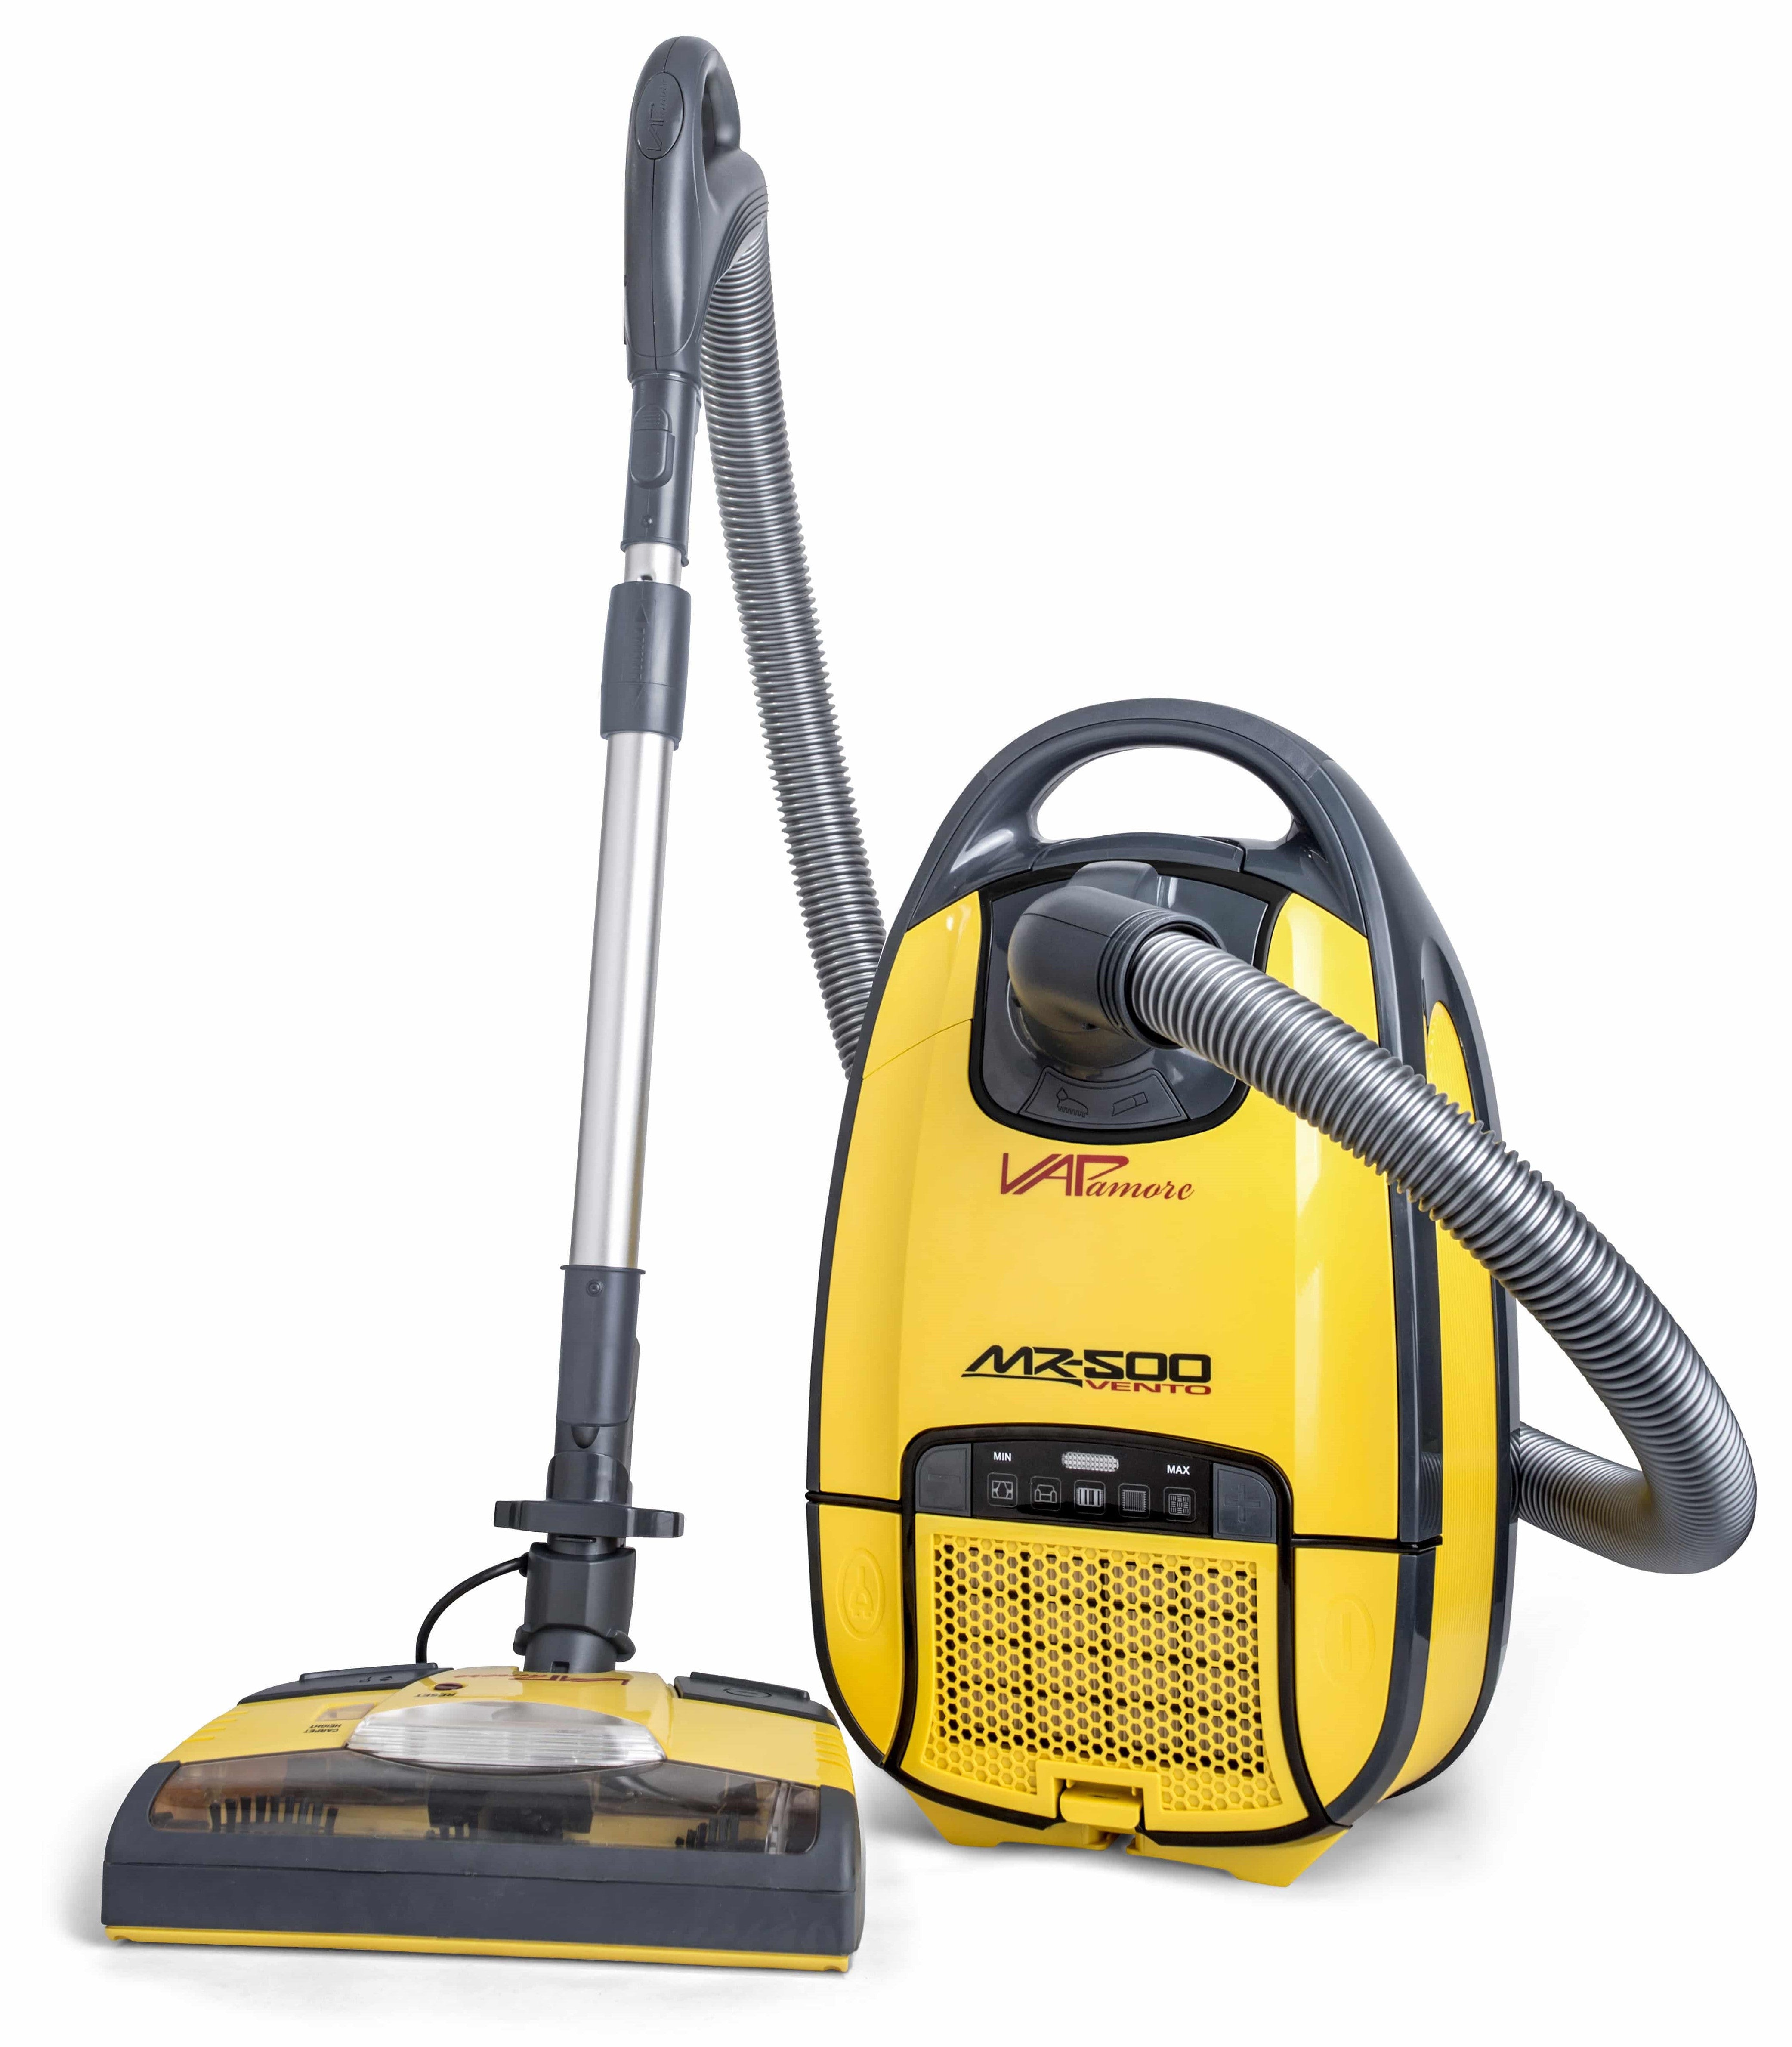 Vapamore MR-500 Vento Canister Vacuum Cleaner